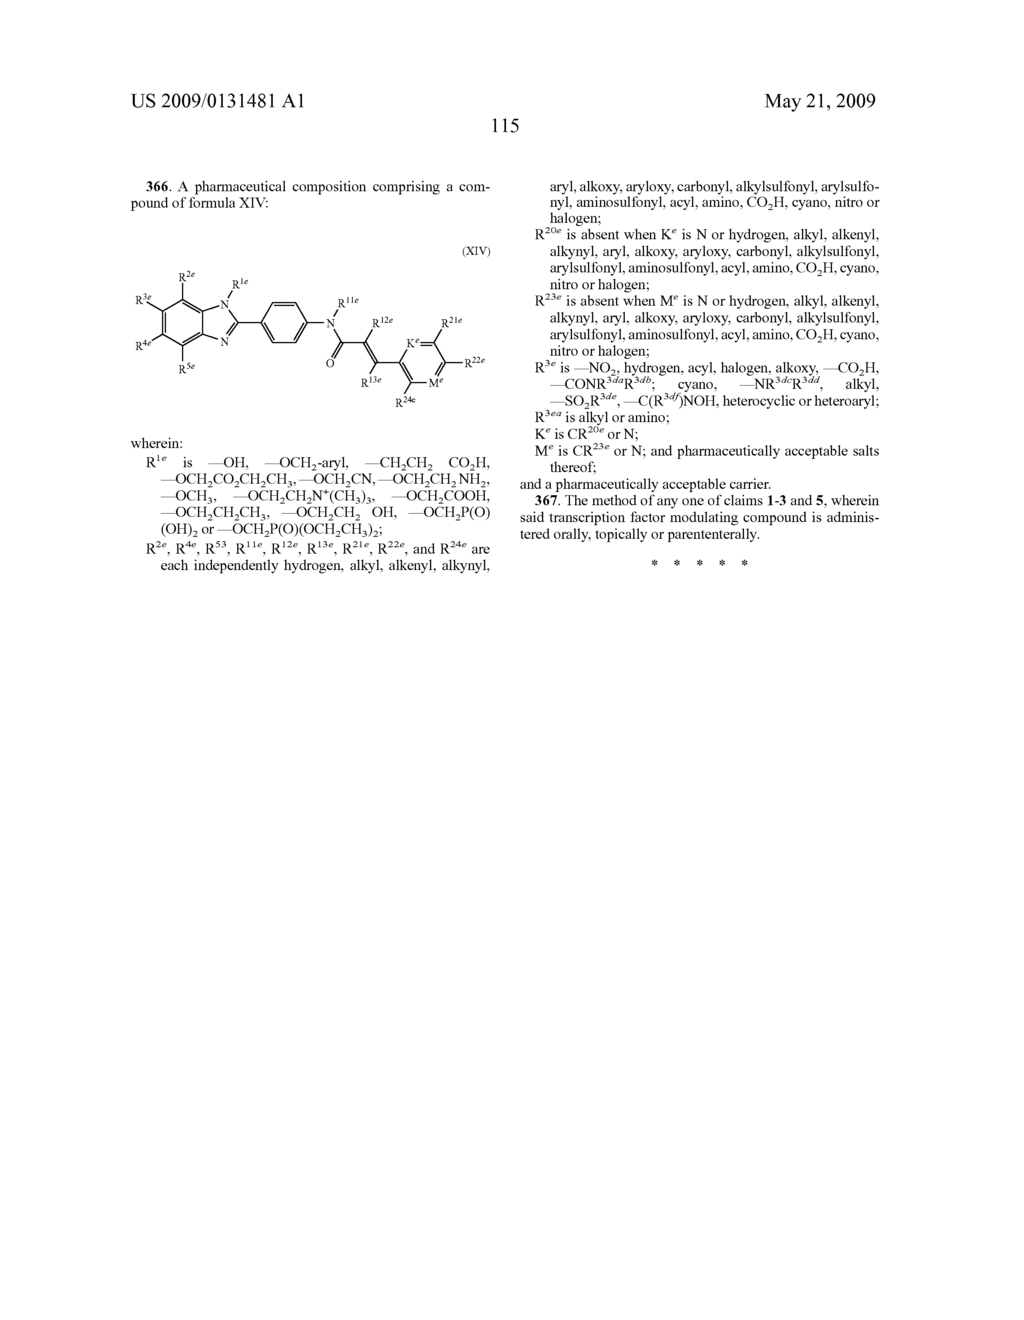 Transcription Factor Modulating Compounds and Methods of Use Thereof - diagram, schematic, and image 122